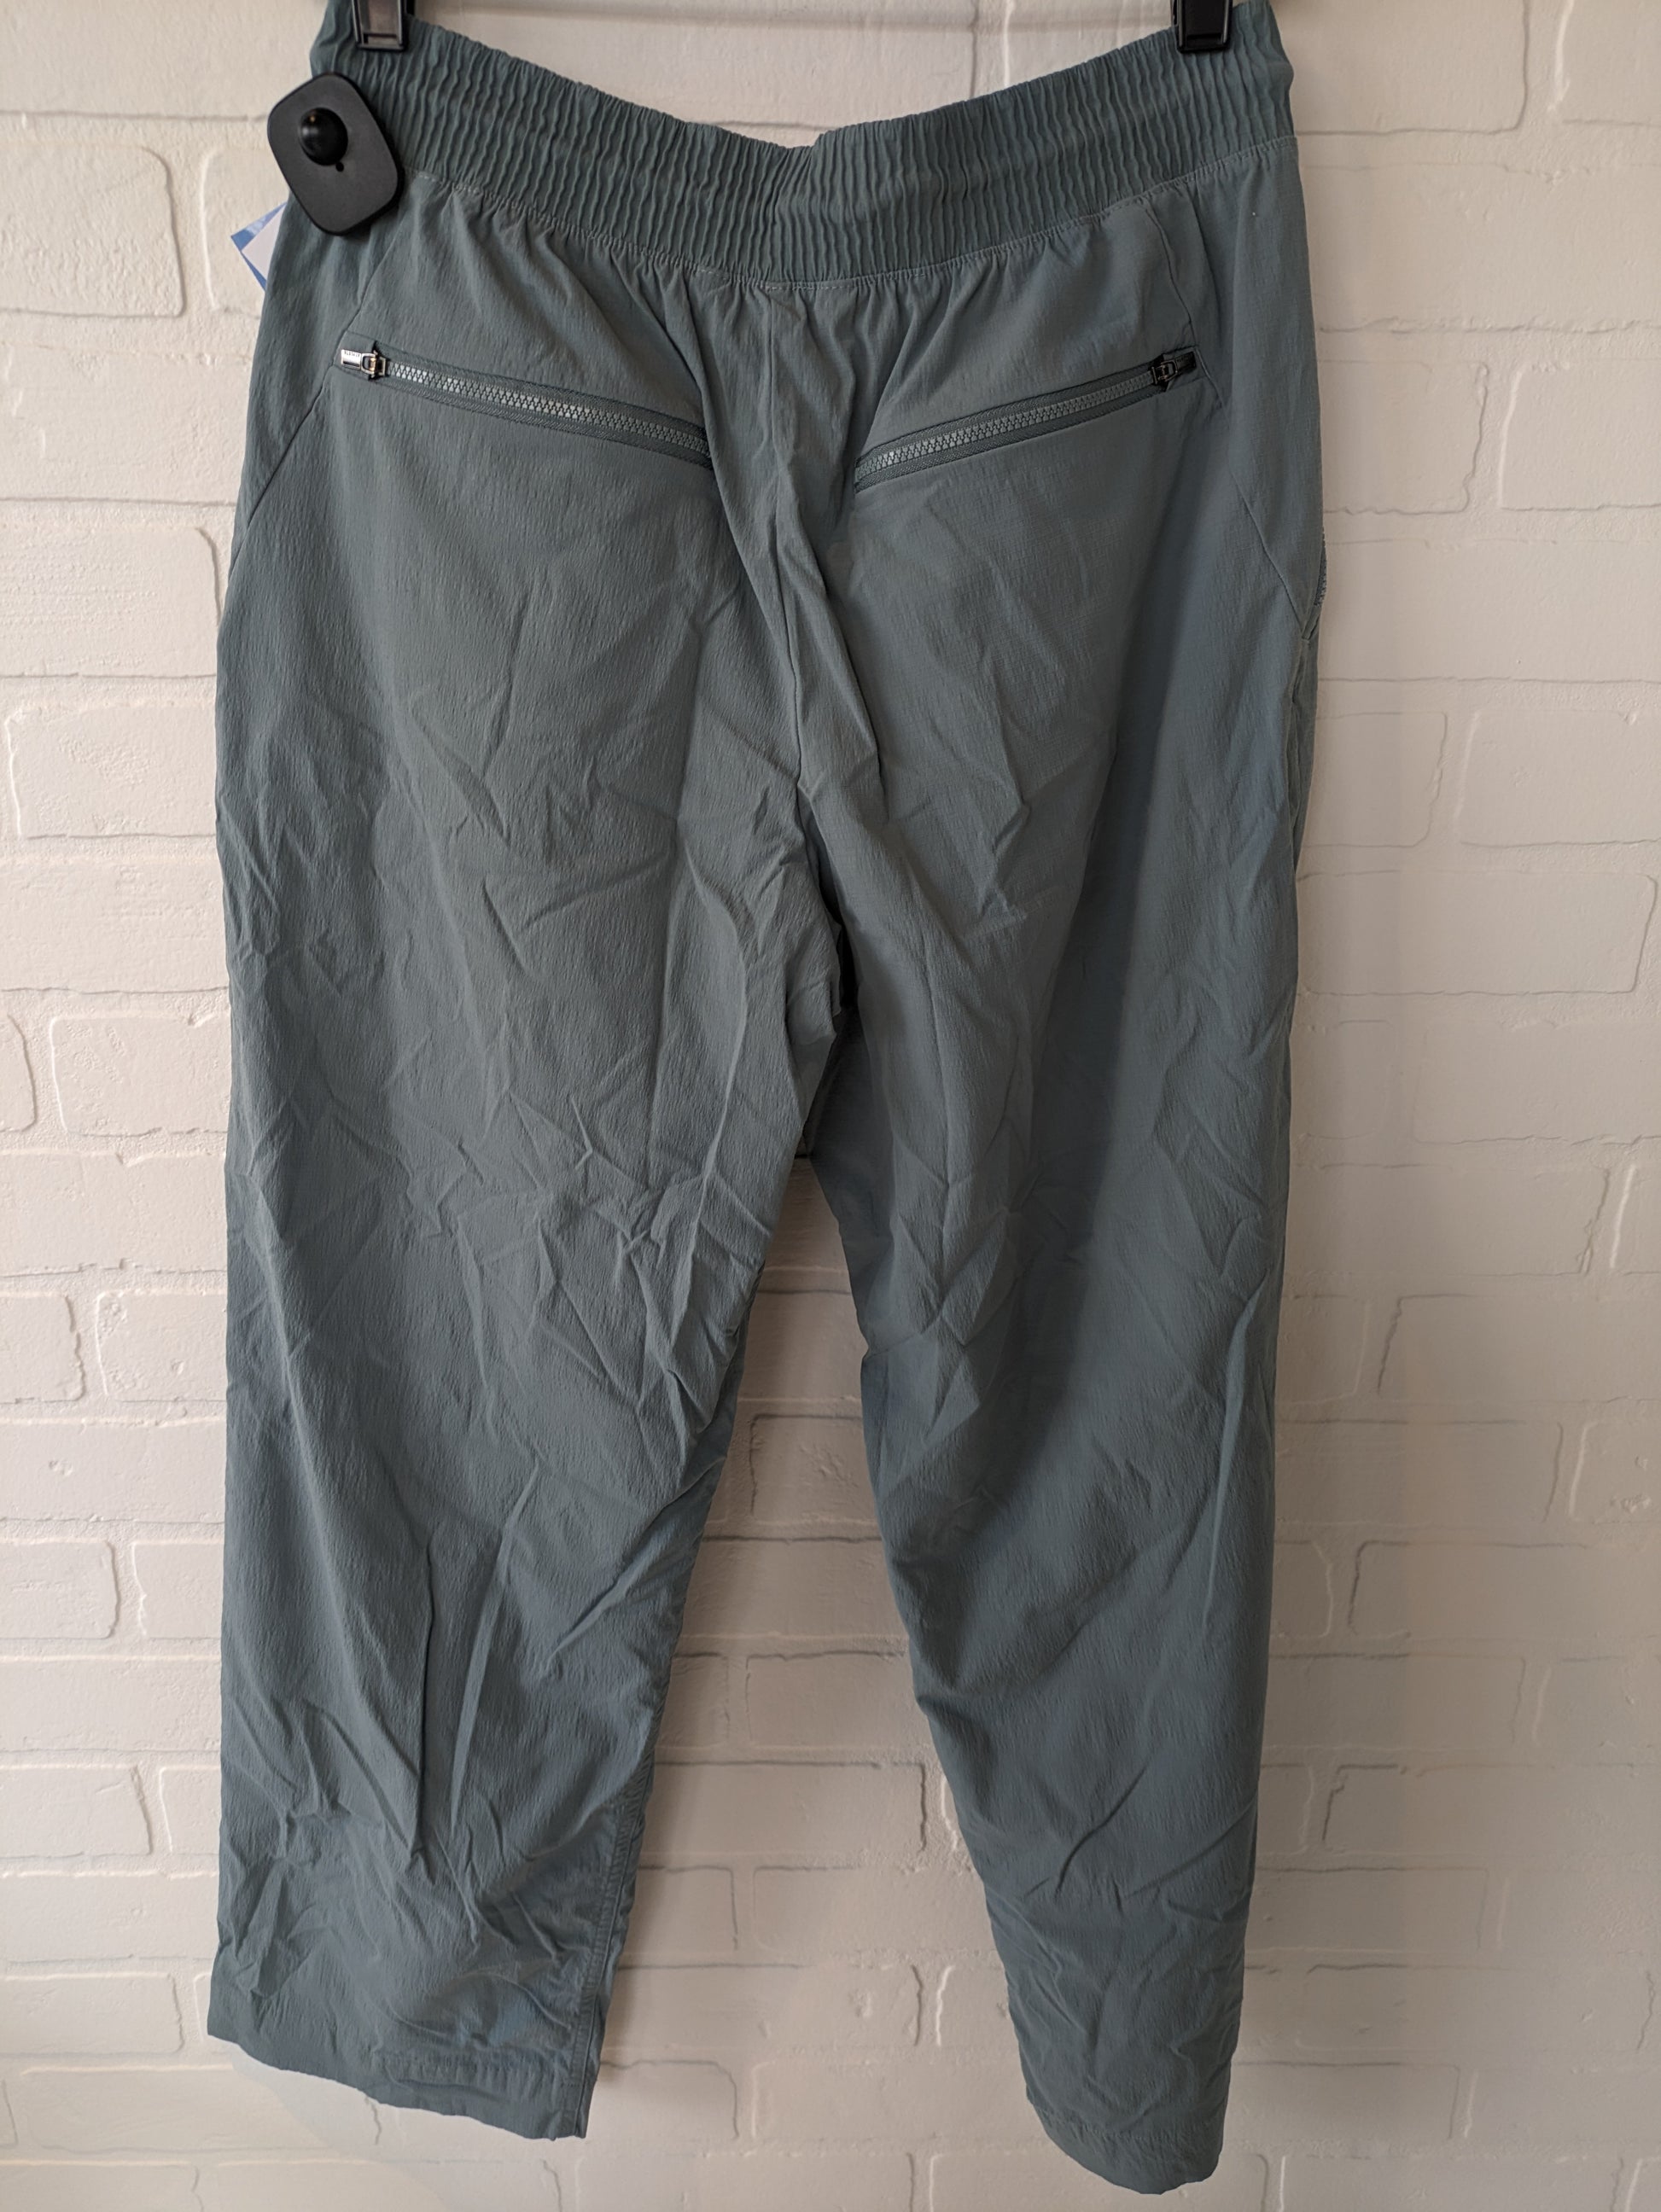 Pants Joggers By Athleta Size: 10